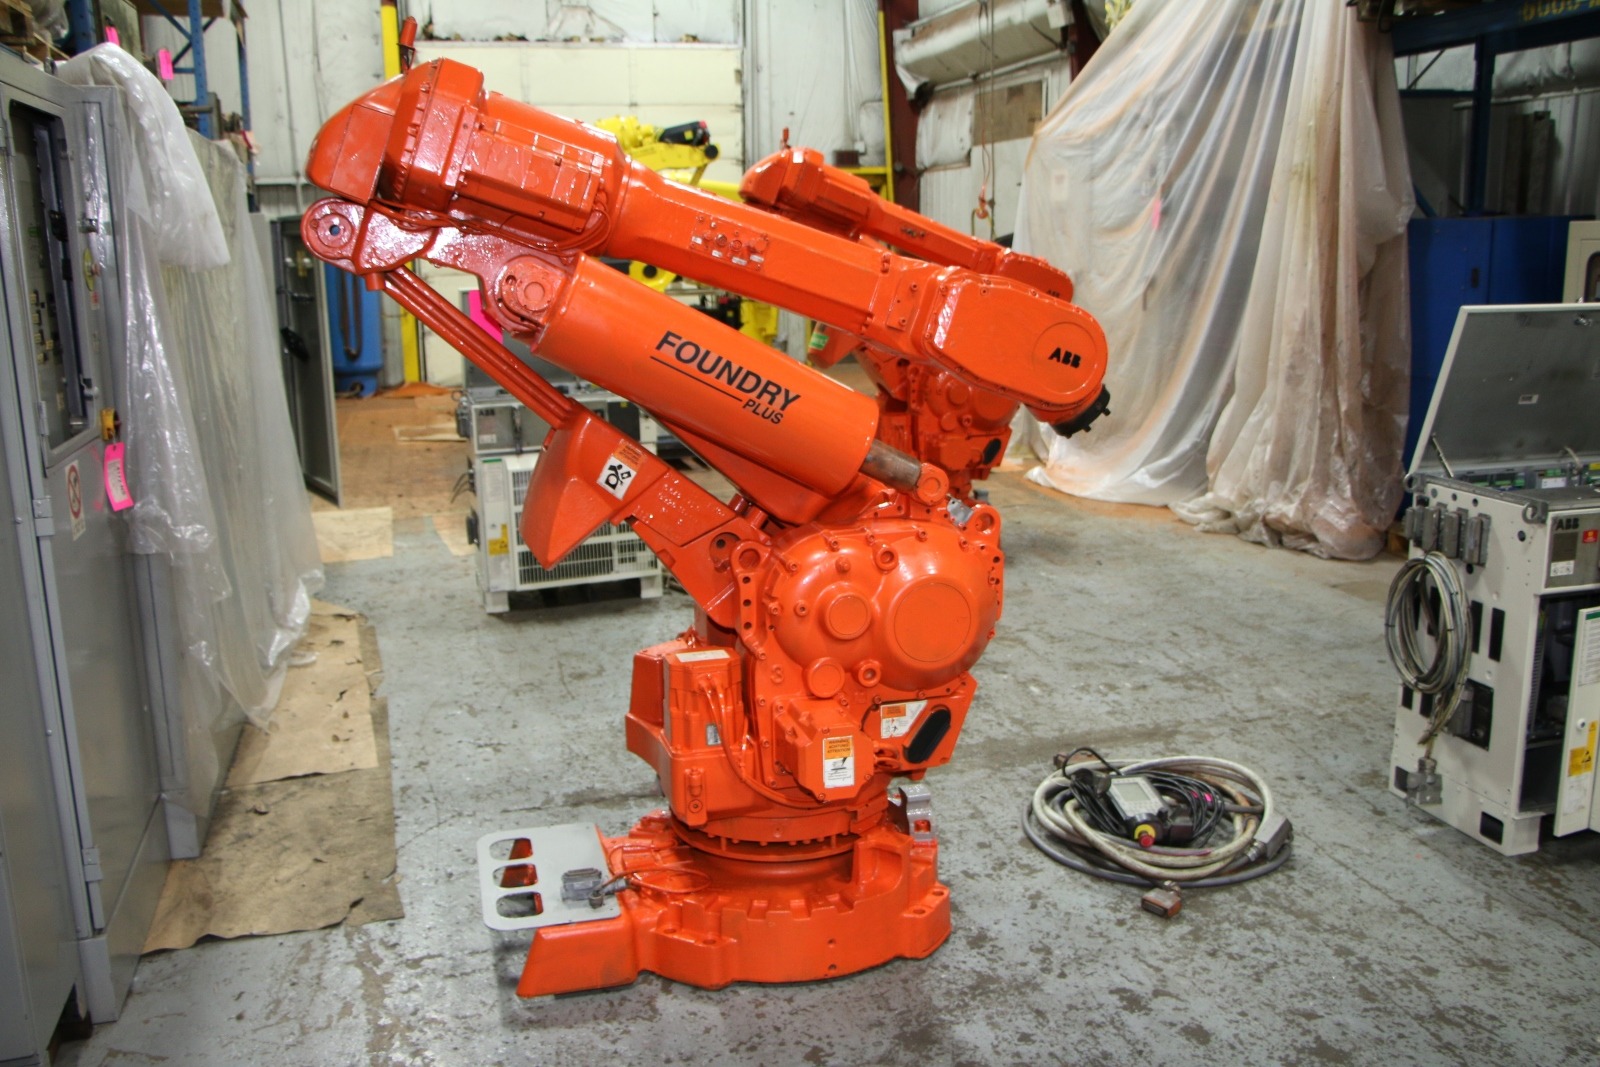 Detailed image of Used ABB Foundry Plus Robot